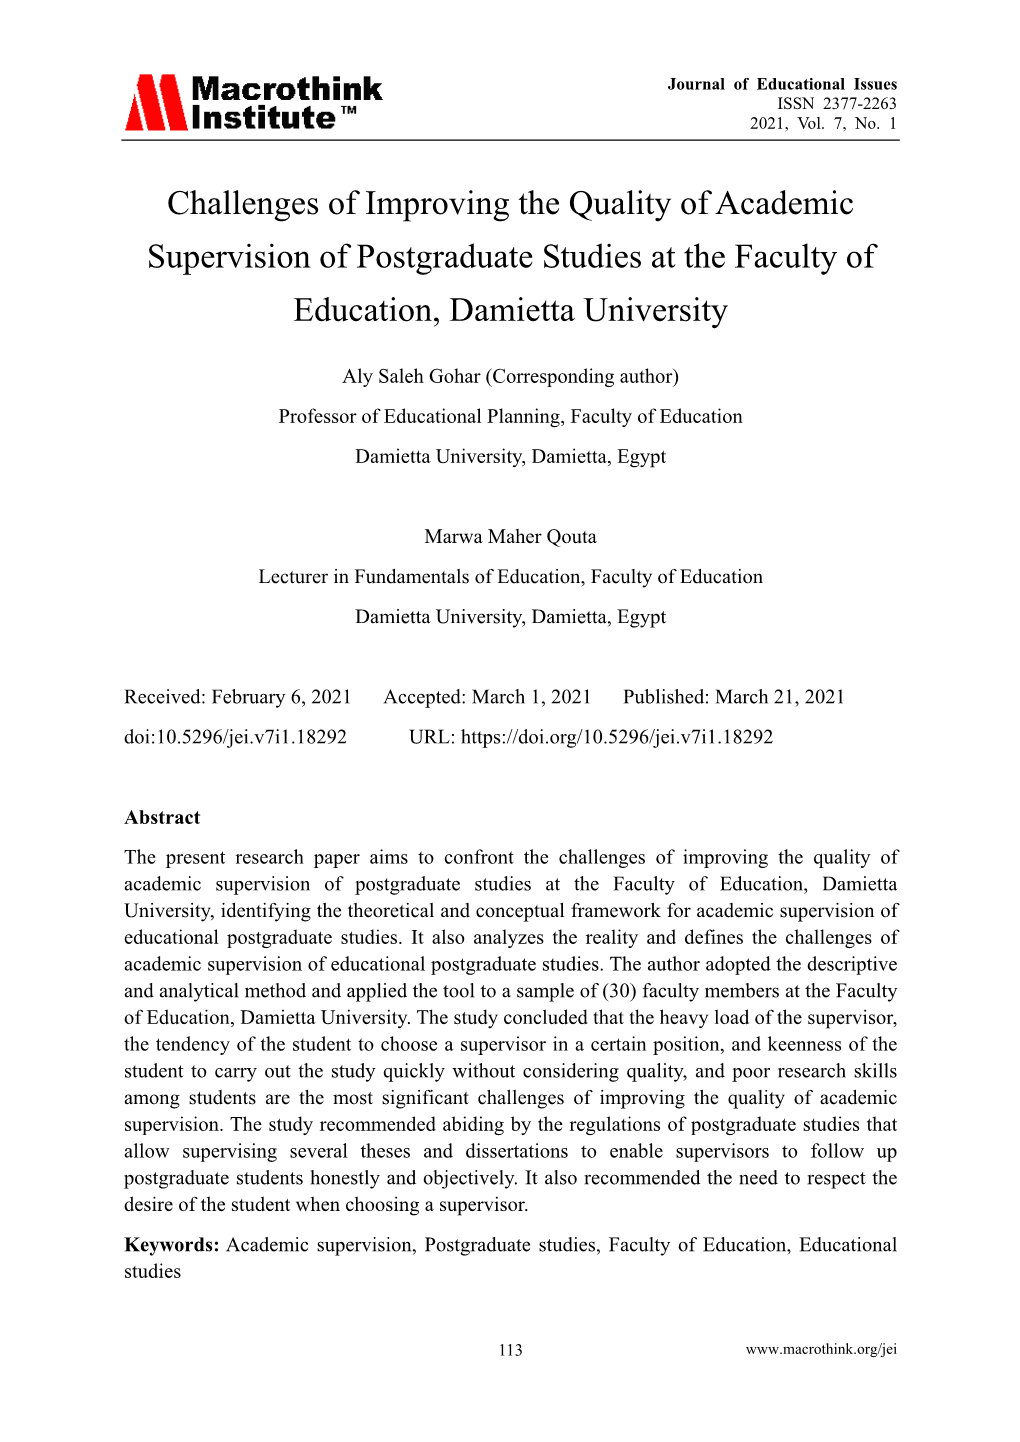 Challenges of Improving the Quality of Academic Supervision of Postgraduate Studies at the Faculty of Education, Damietta University